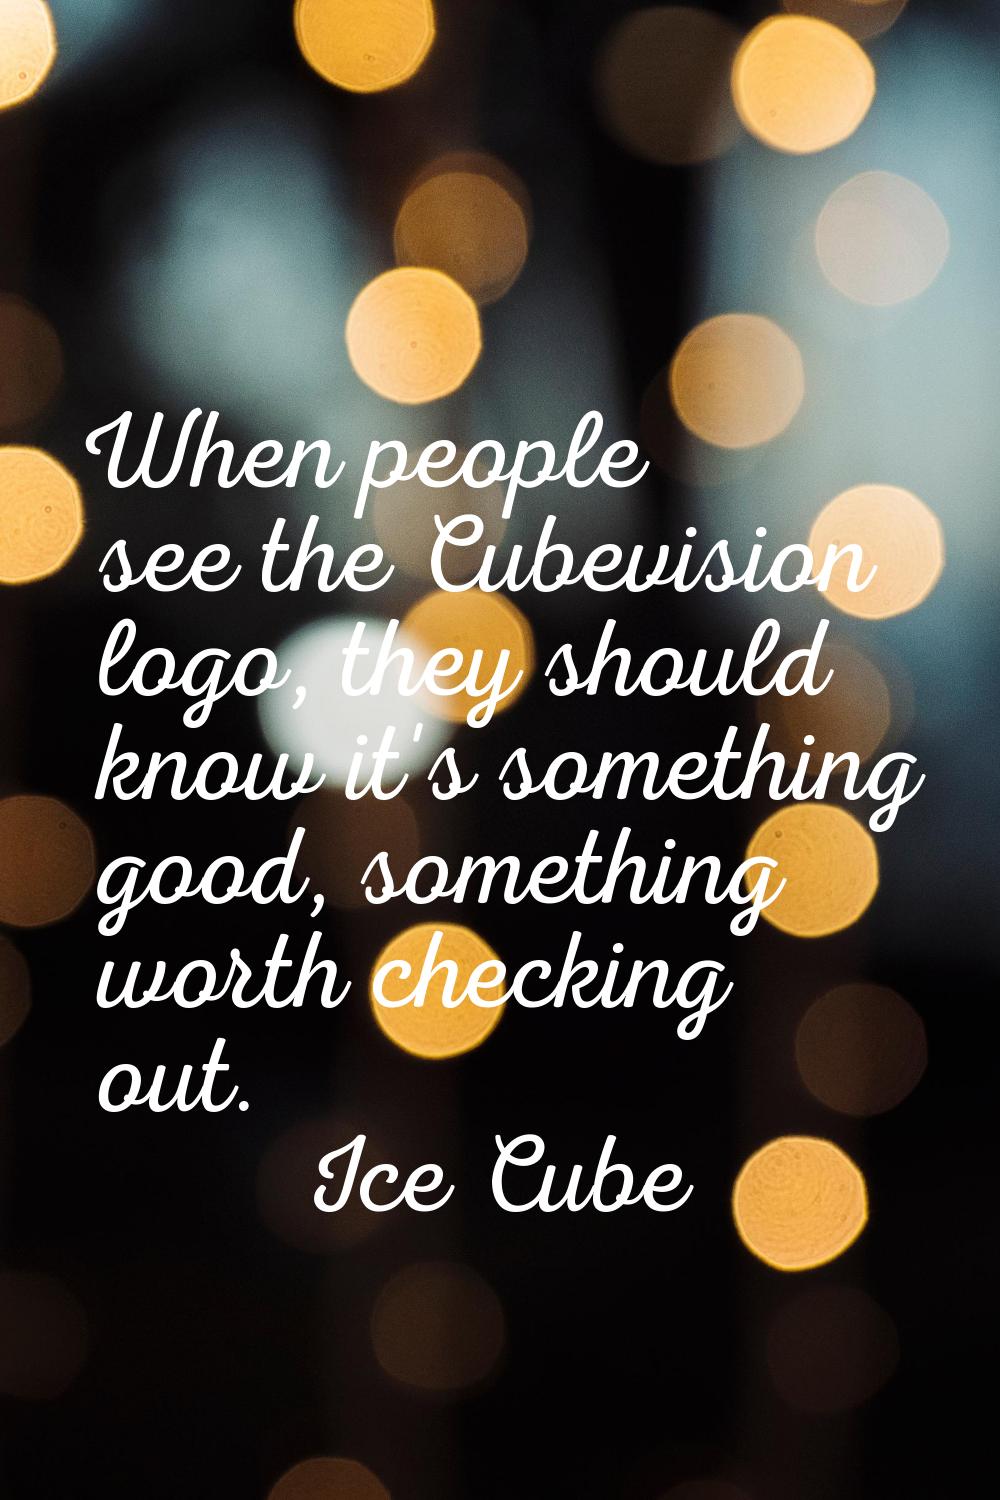 When people see the Cubevision logo, they should know it's something good, something worth checking